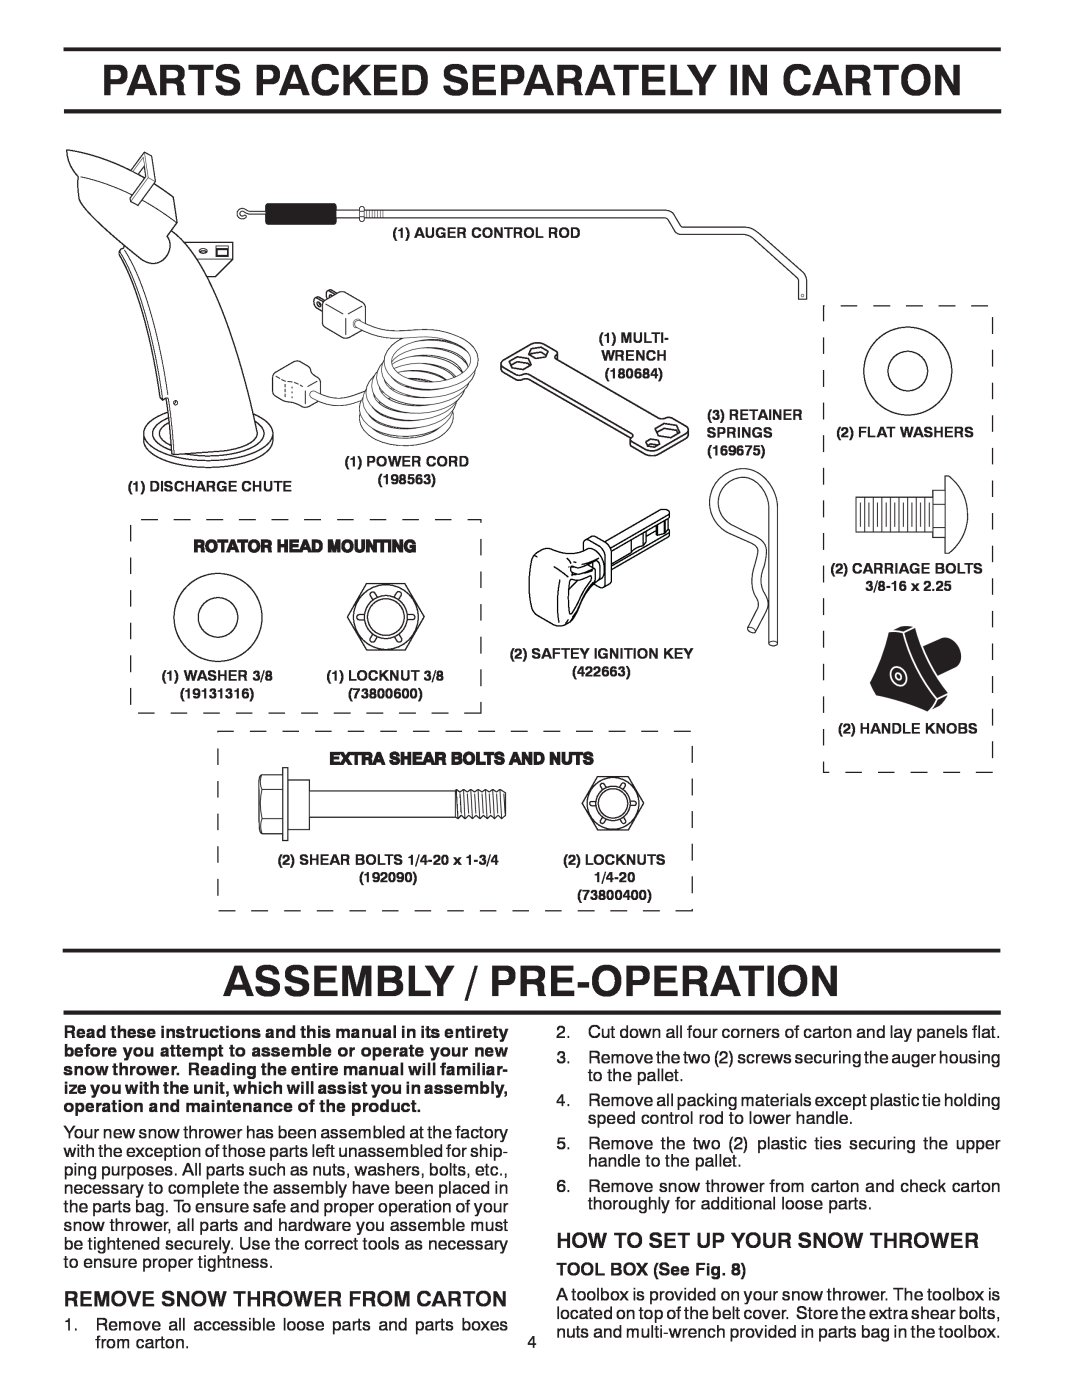 Poulan 428689, 96192002901 Parts Packed Separately In Carton, Assembly / Pre-Operation, How To Set Up Your Snow Thrower 